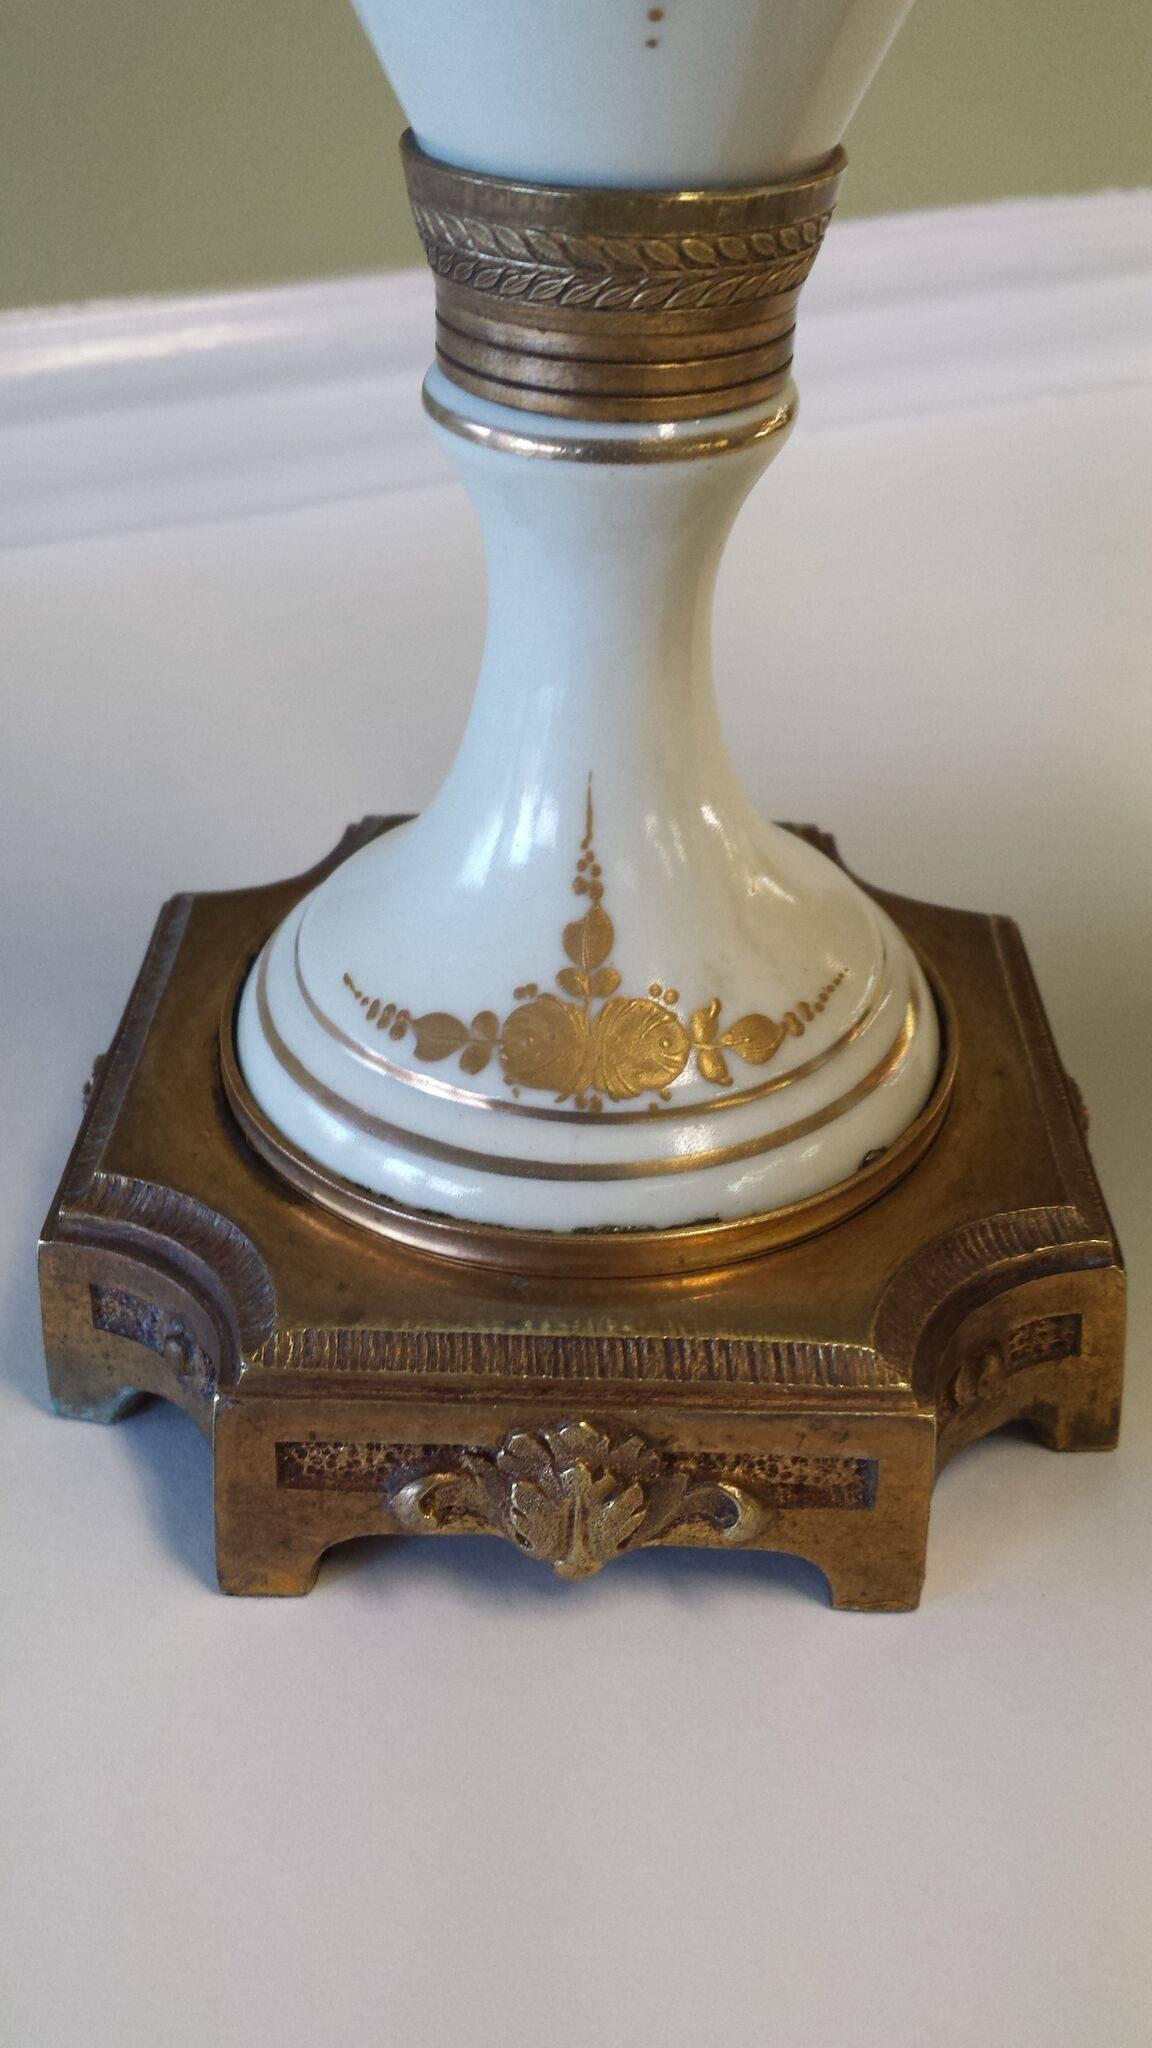 Pair of French Mantle Urns Convertible to Lamp Bases, Factory Done, Made in France in a Sevres style. They are made to be either or, the top unscrews and is threaded for a standard light socket and has a bottom slot with an trimmed wire hole (please